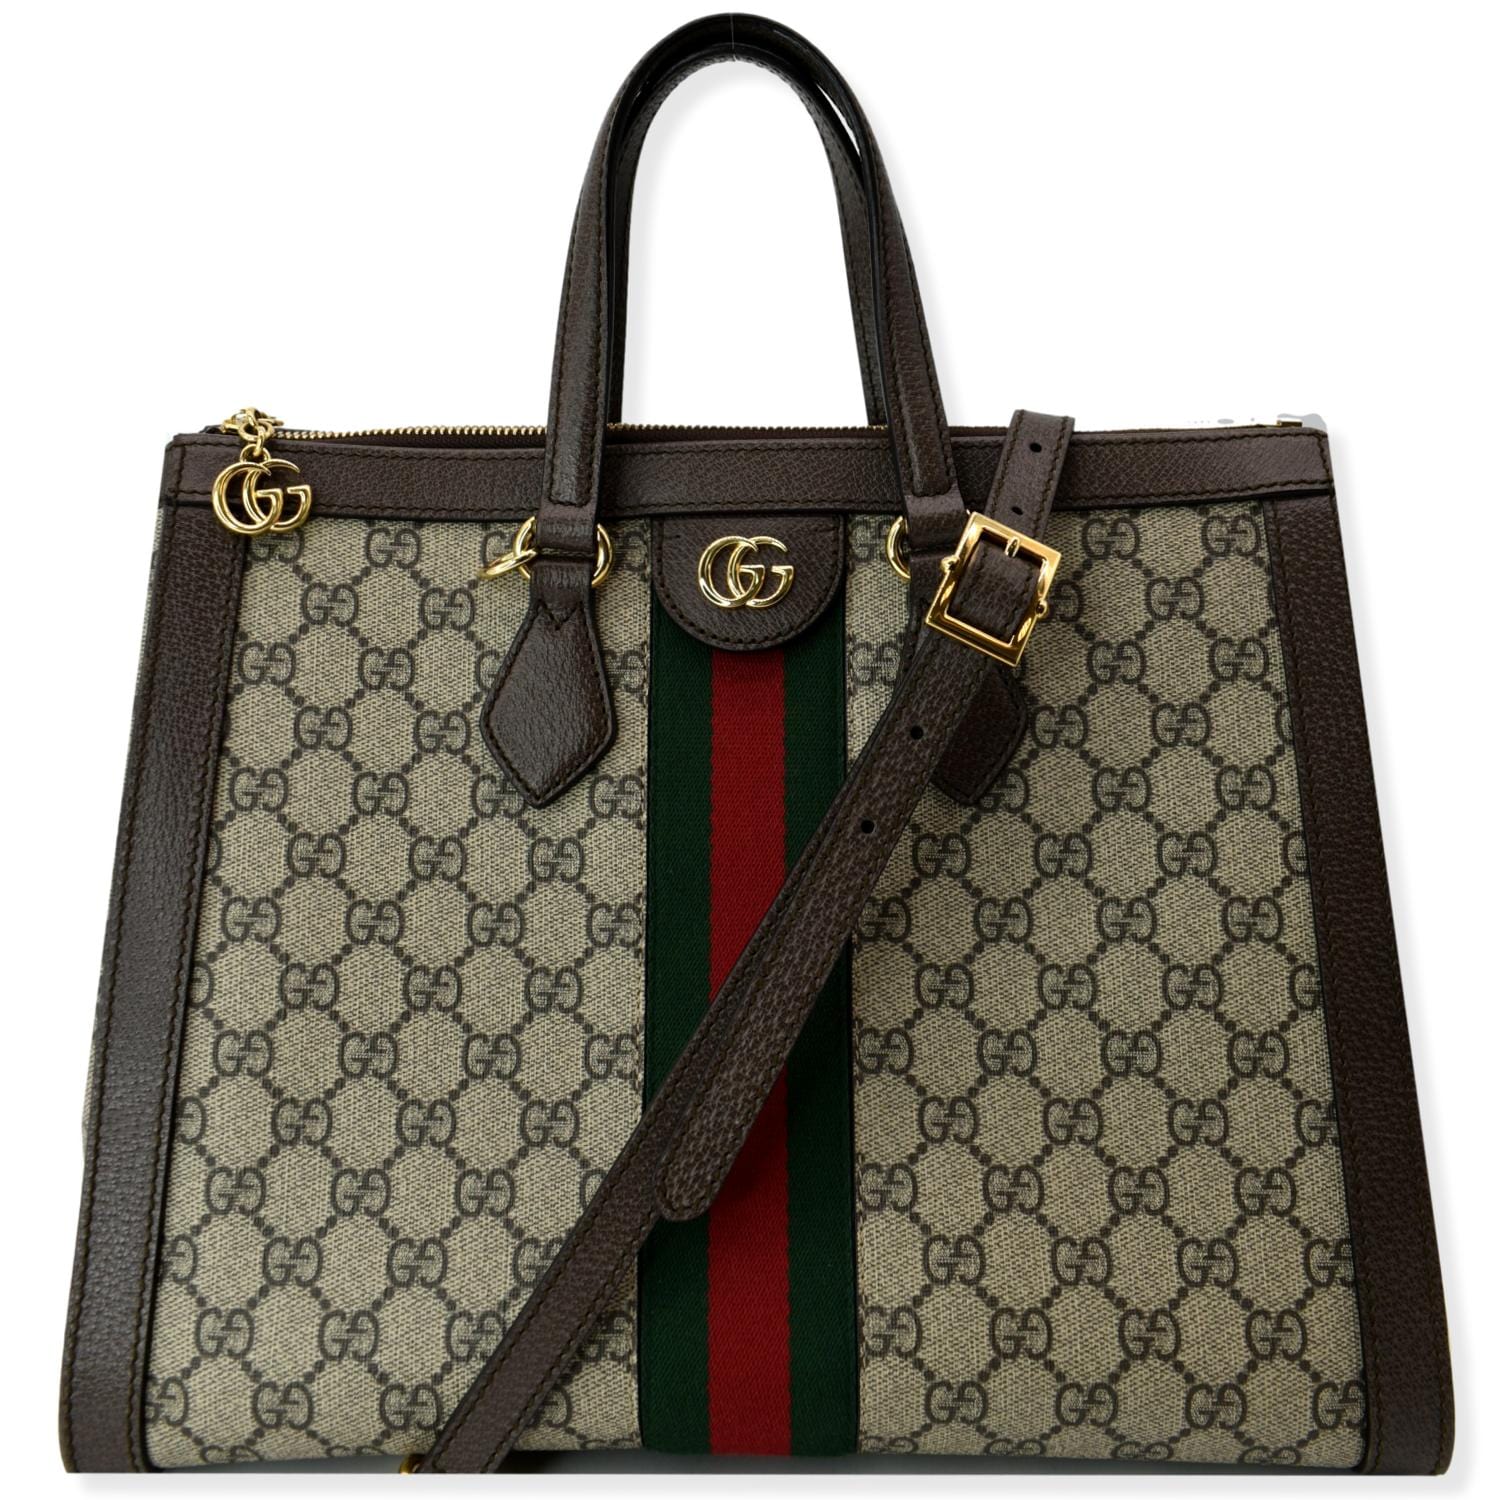 Gucci, Bags, Excellent Gucci Ophidia Gg Supreme Small Tote Crossbody Bag